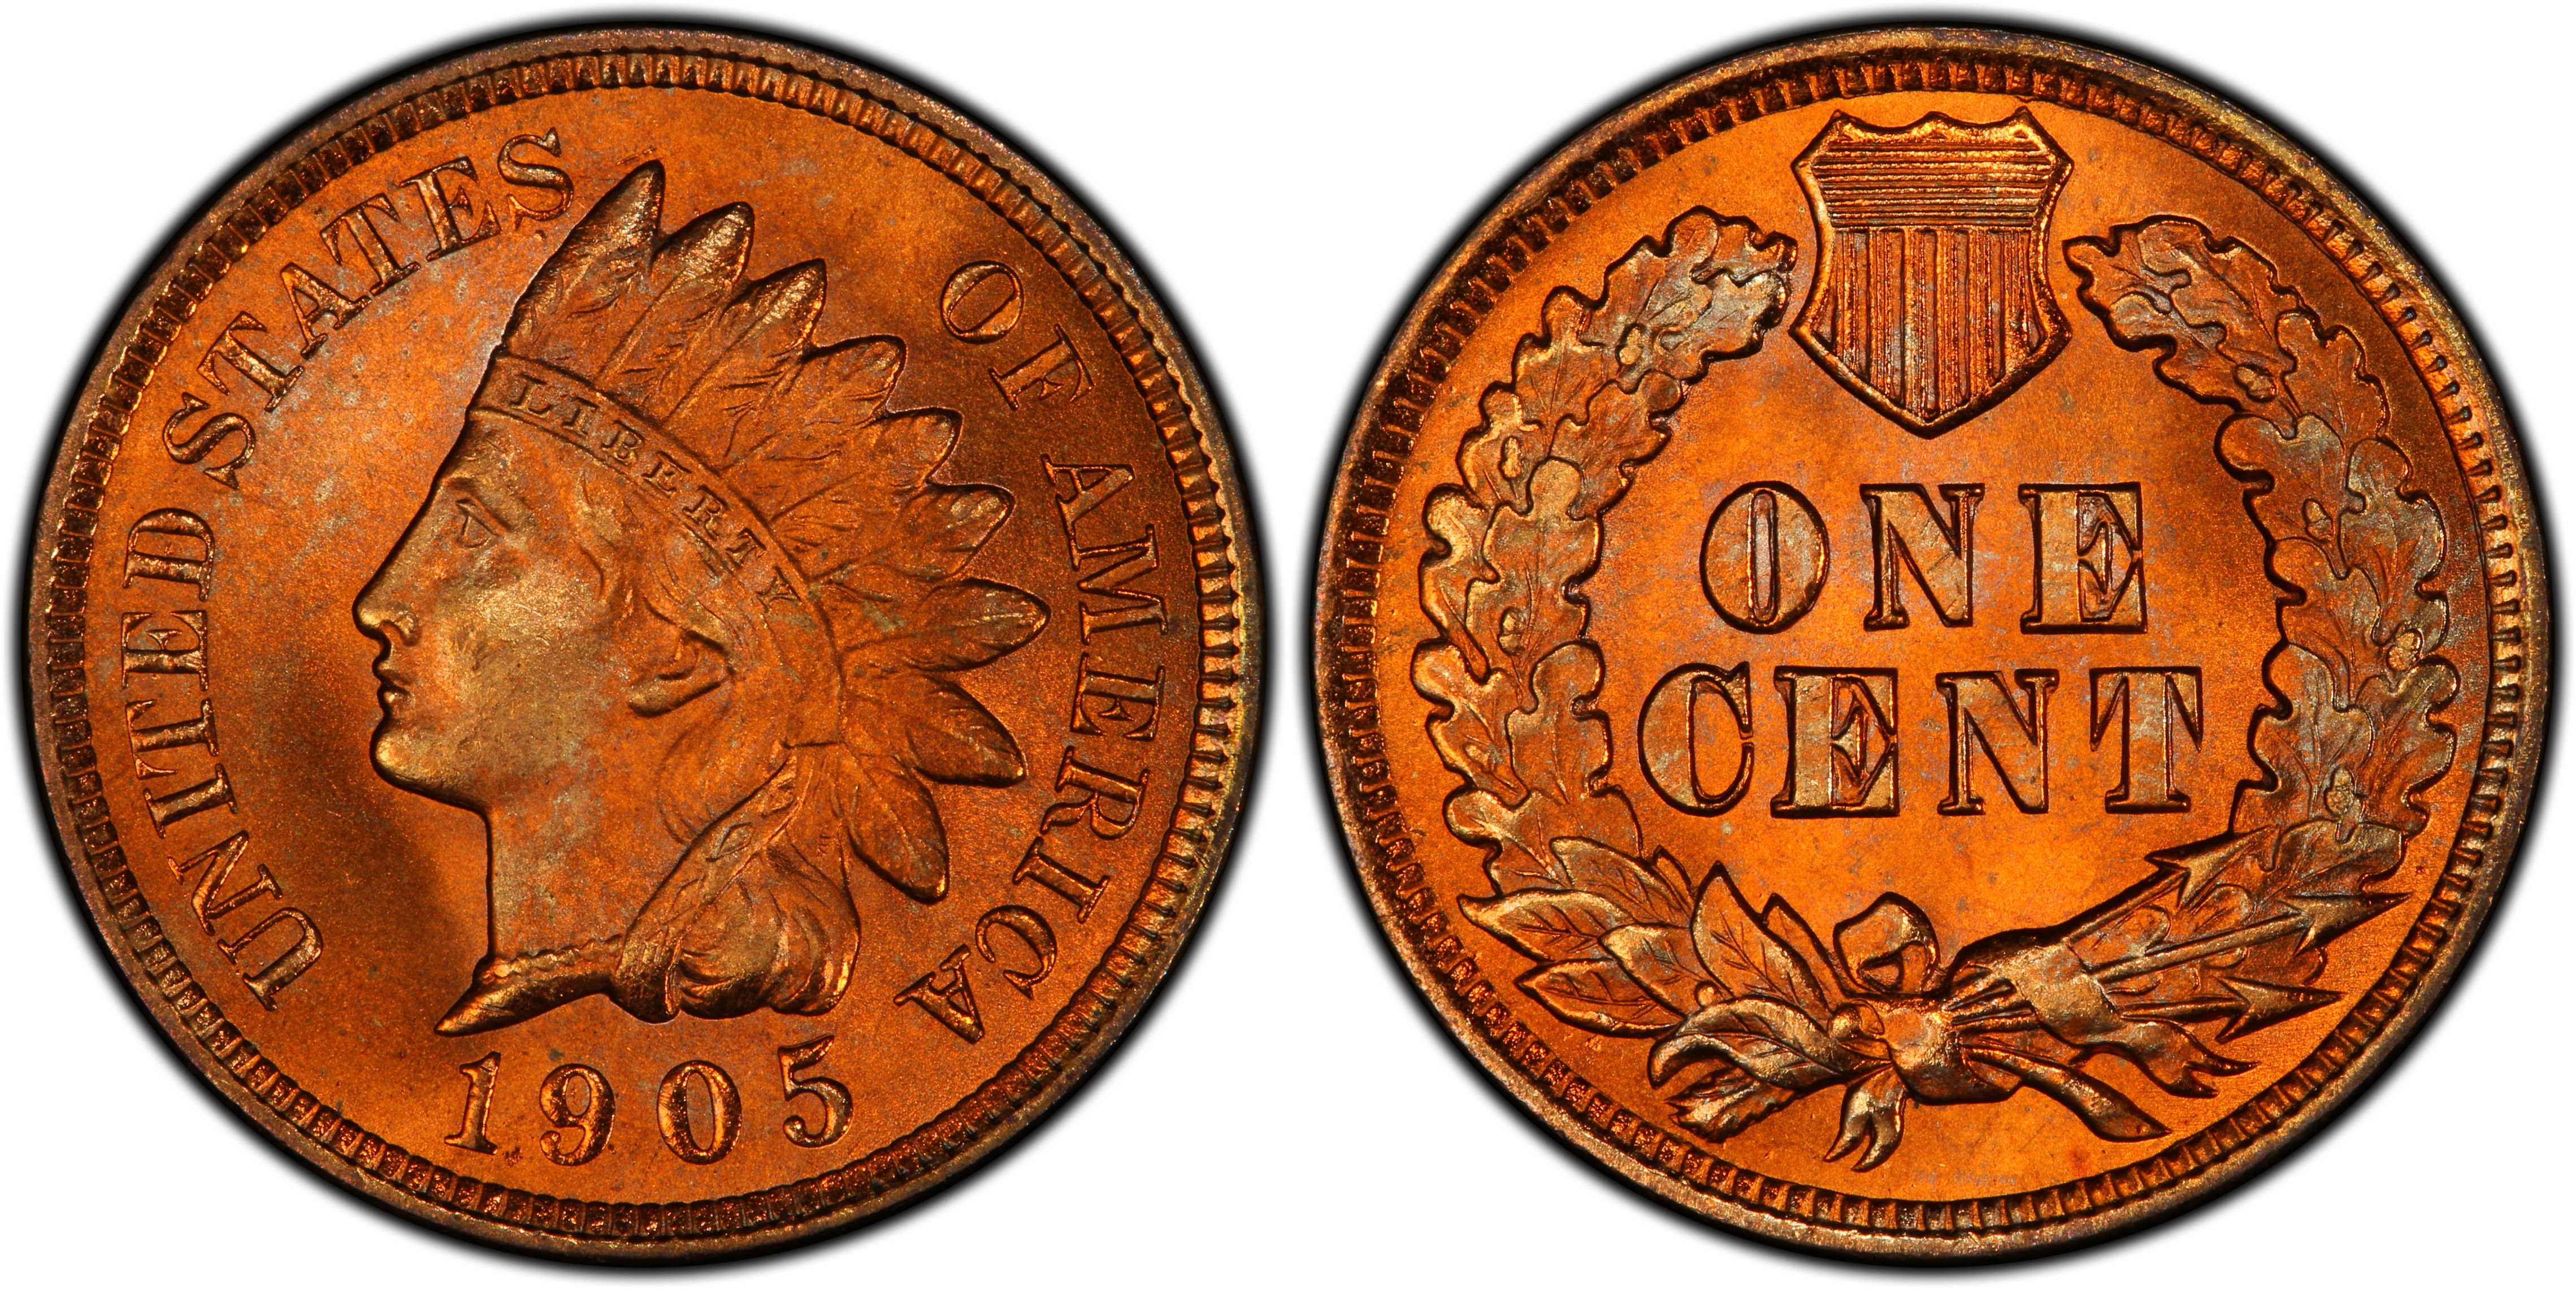 Images of Indian Cent 1905 1C, RD - PCGS CoinFacts